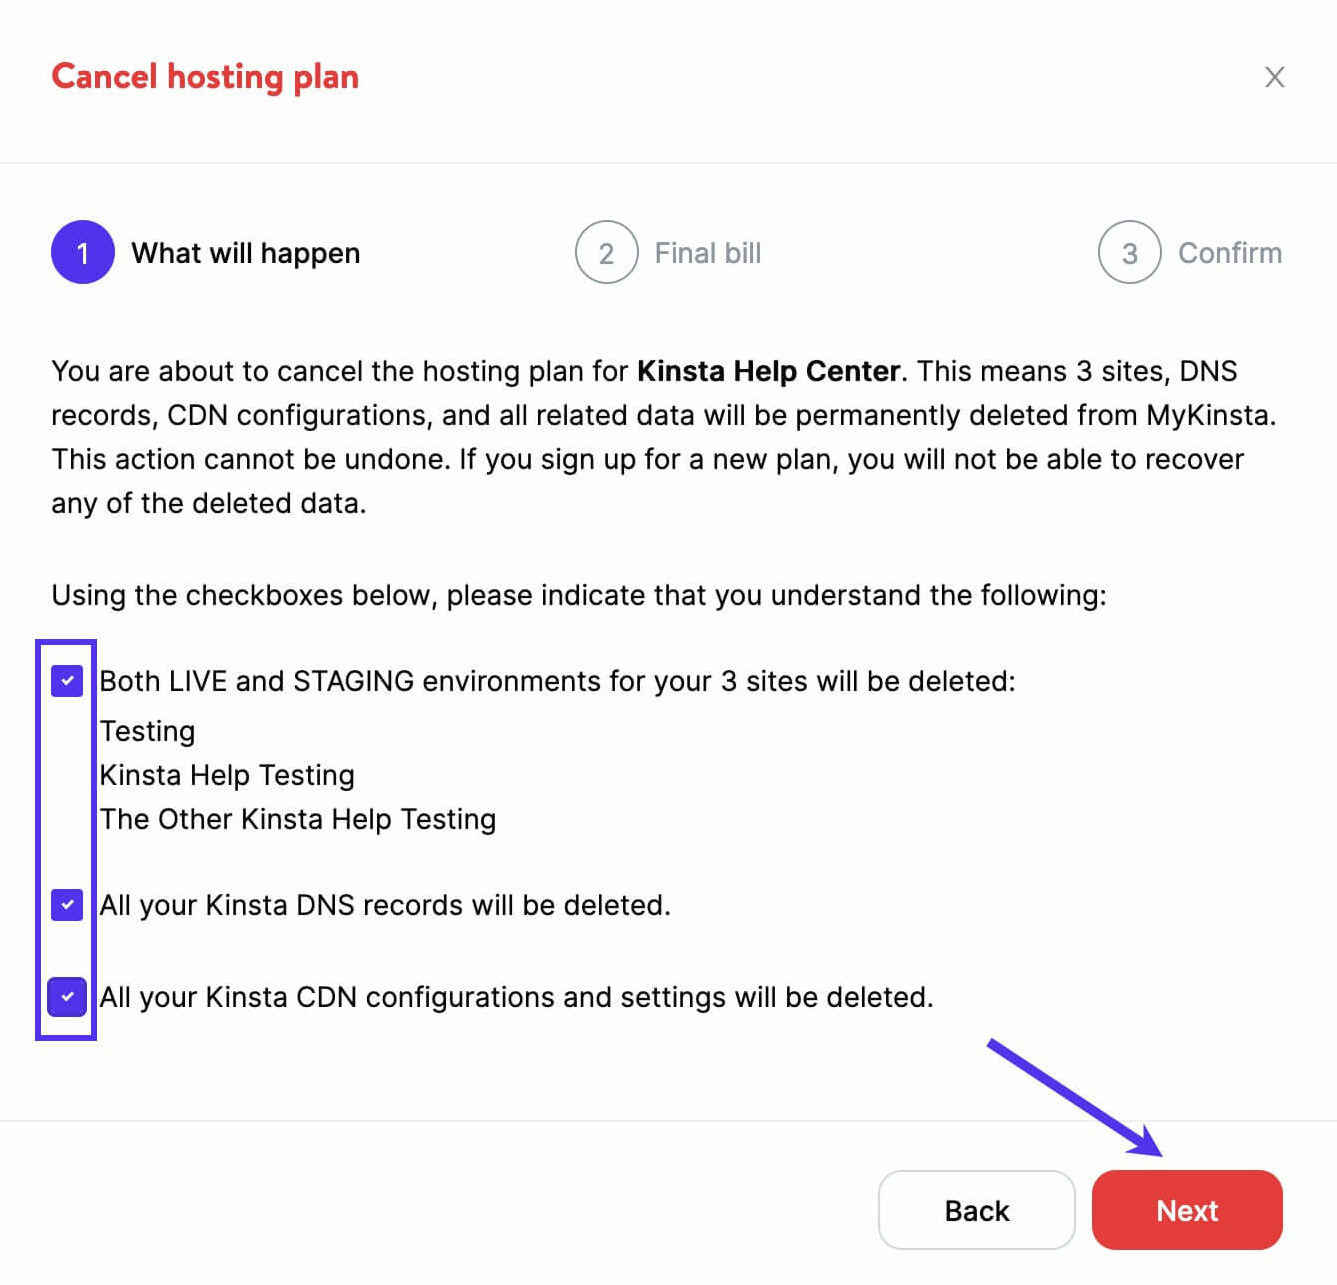 Cancel hosting plan and acknowledge all data will be deleted.